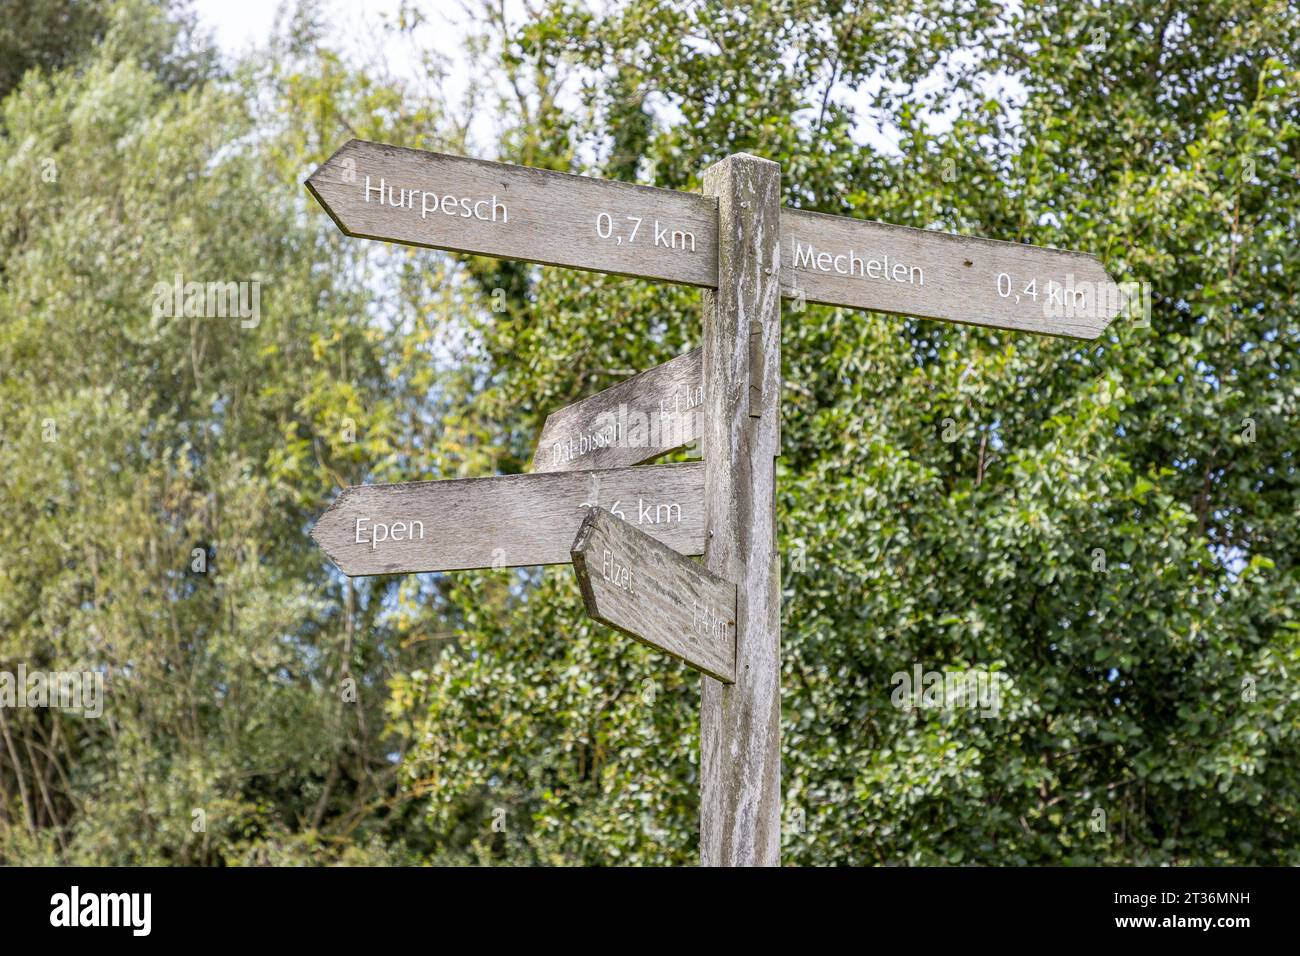 Hiking routes sign at crossroads in Gulpen-Wittem region, towards towns: Hurpesch, Mechelen, Epen and Elzet, green foliage of trees in blurred backgro Stock Photo